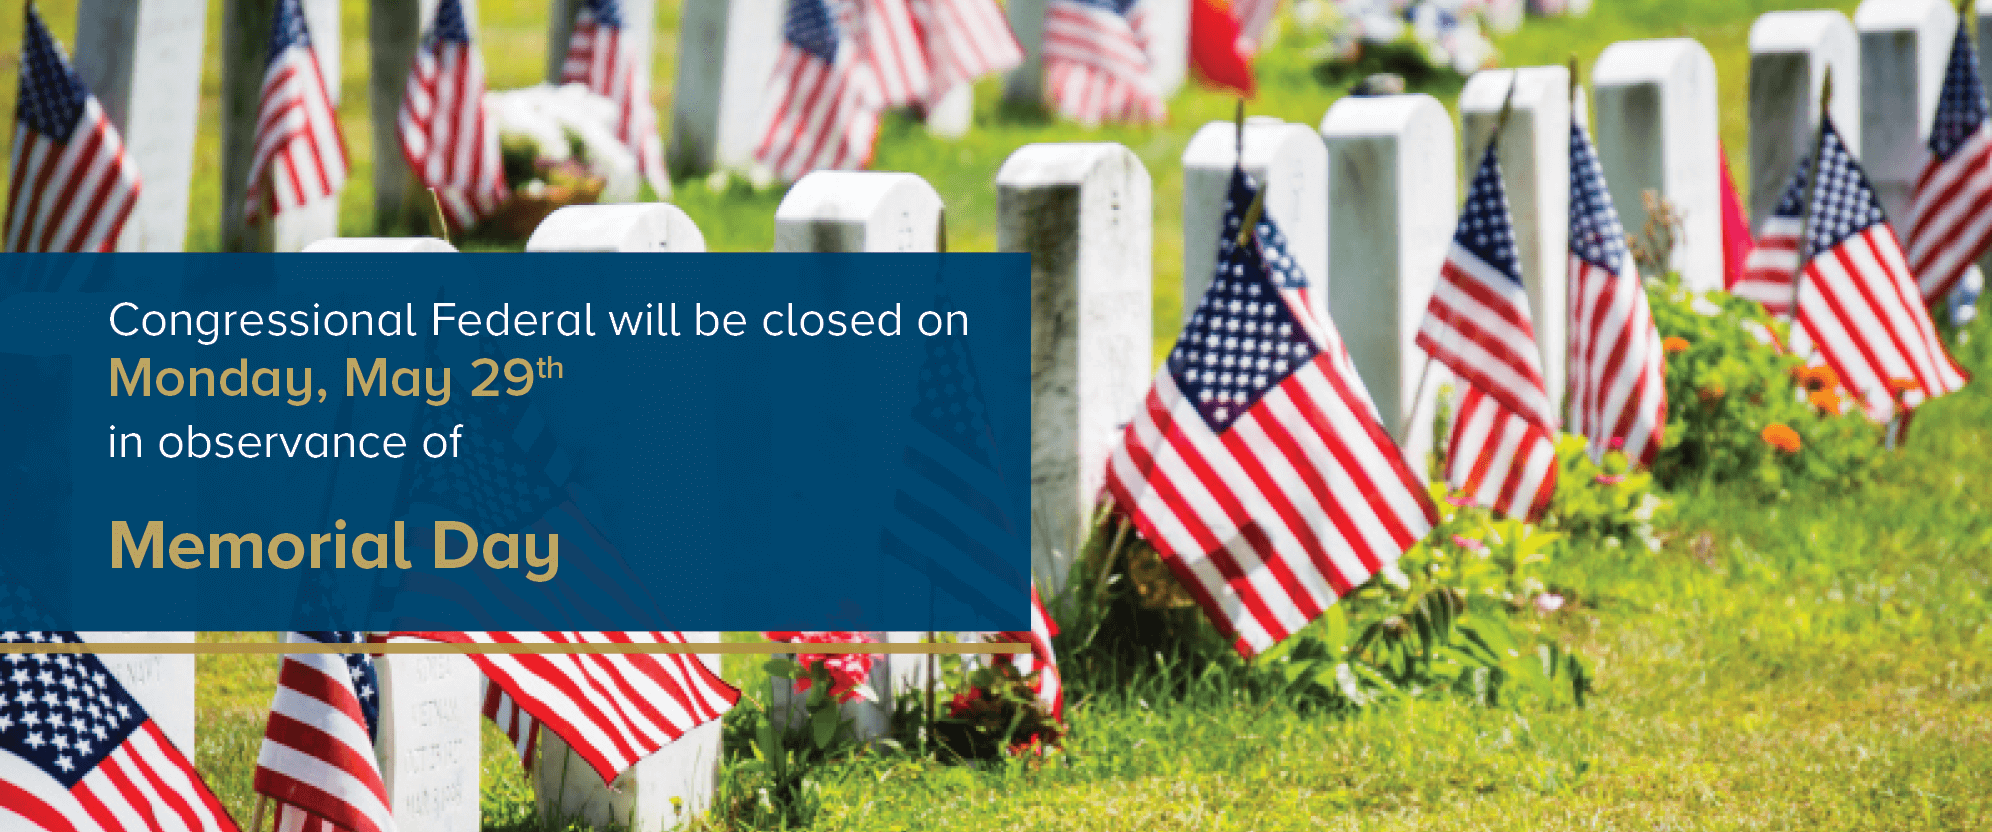 Congressional Federal will be closed on Monday, May 29th in observance of Memorial Day